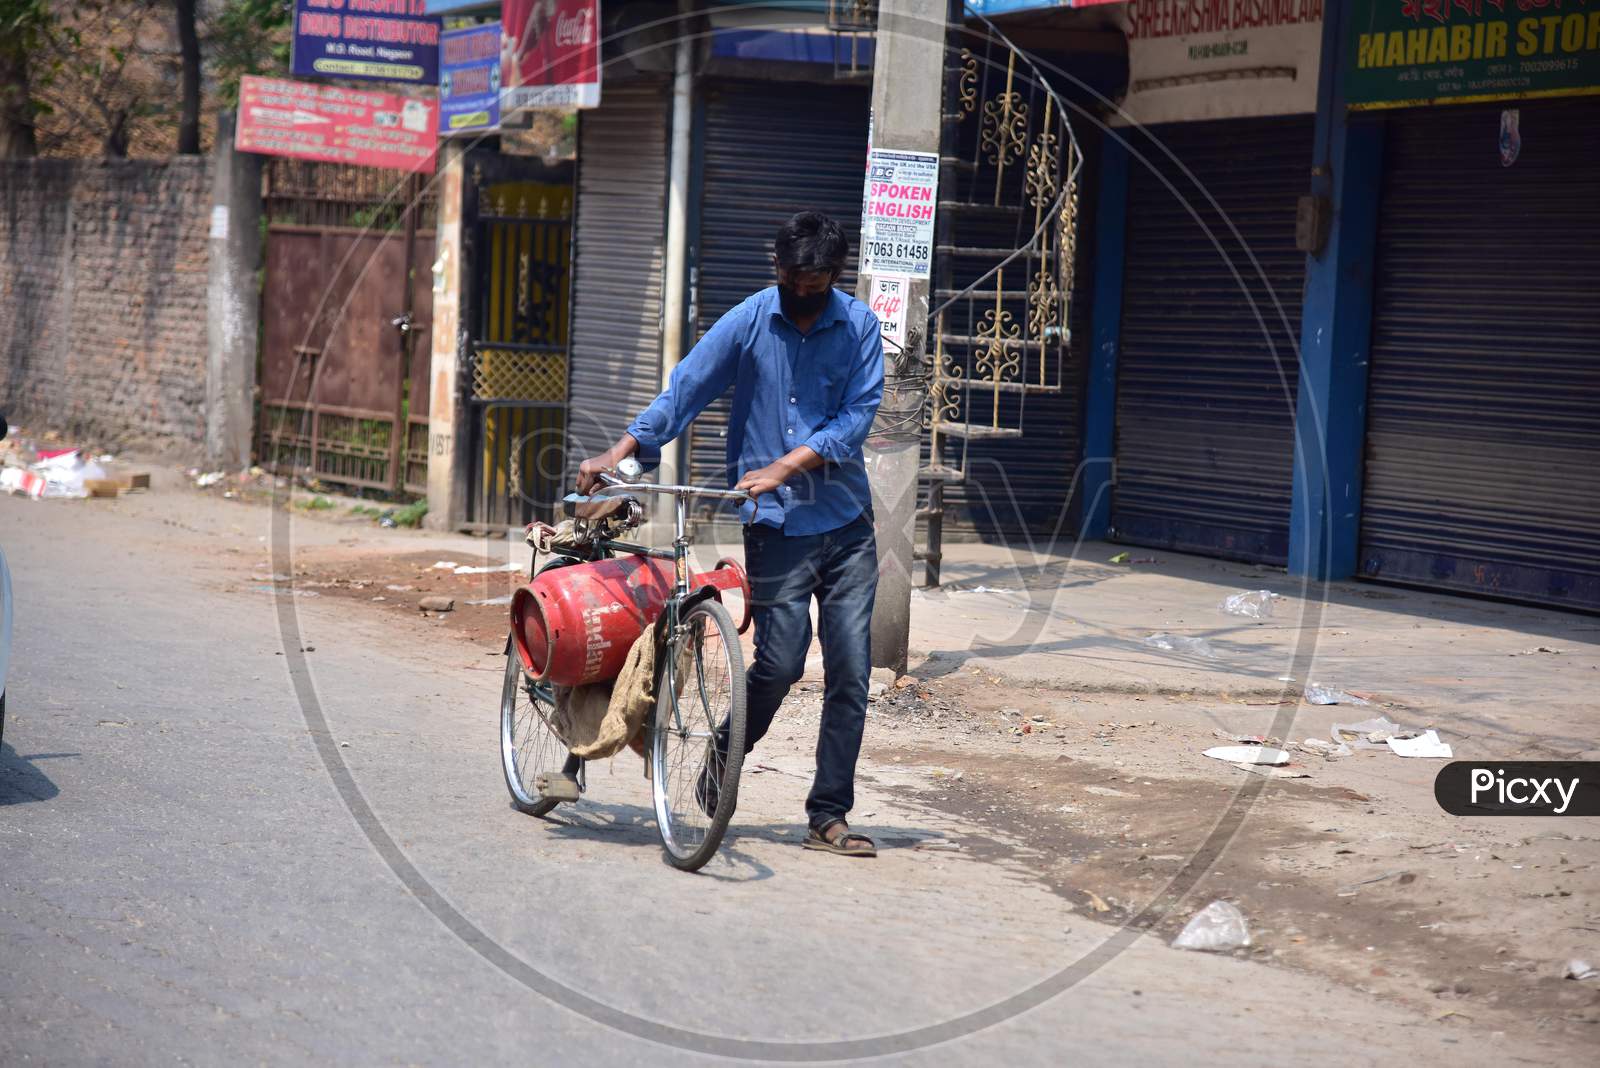 A   Commuter Carry A  L.P.G Cylender On His Bicycle  During A Nationwide Lockdown In The Wake Of Coronavirus Pandemic, In Nagaon District Of Assam ,India